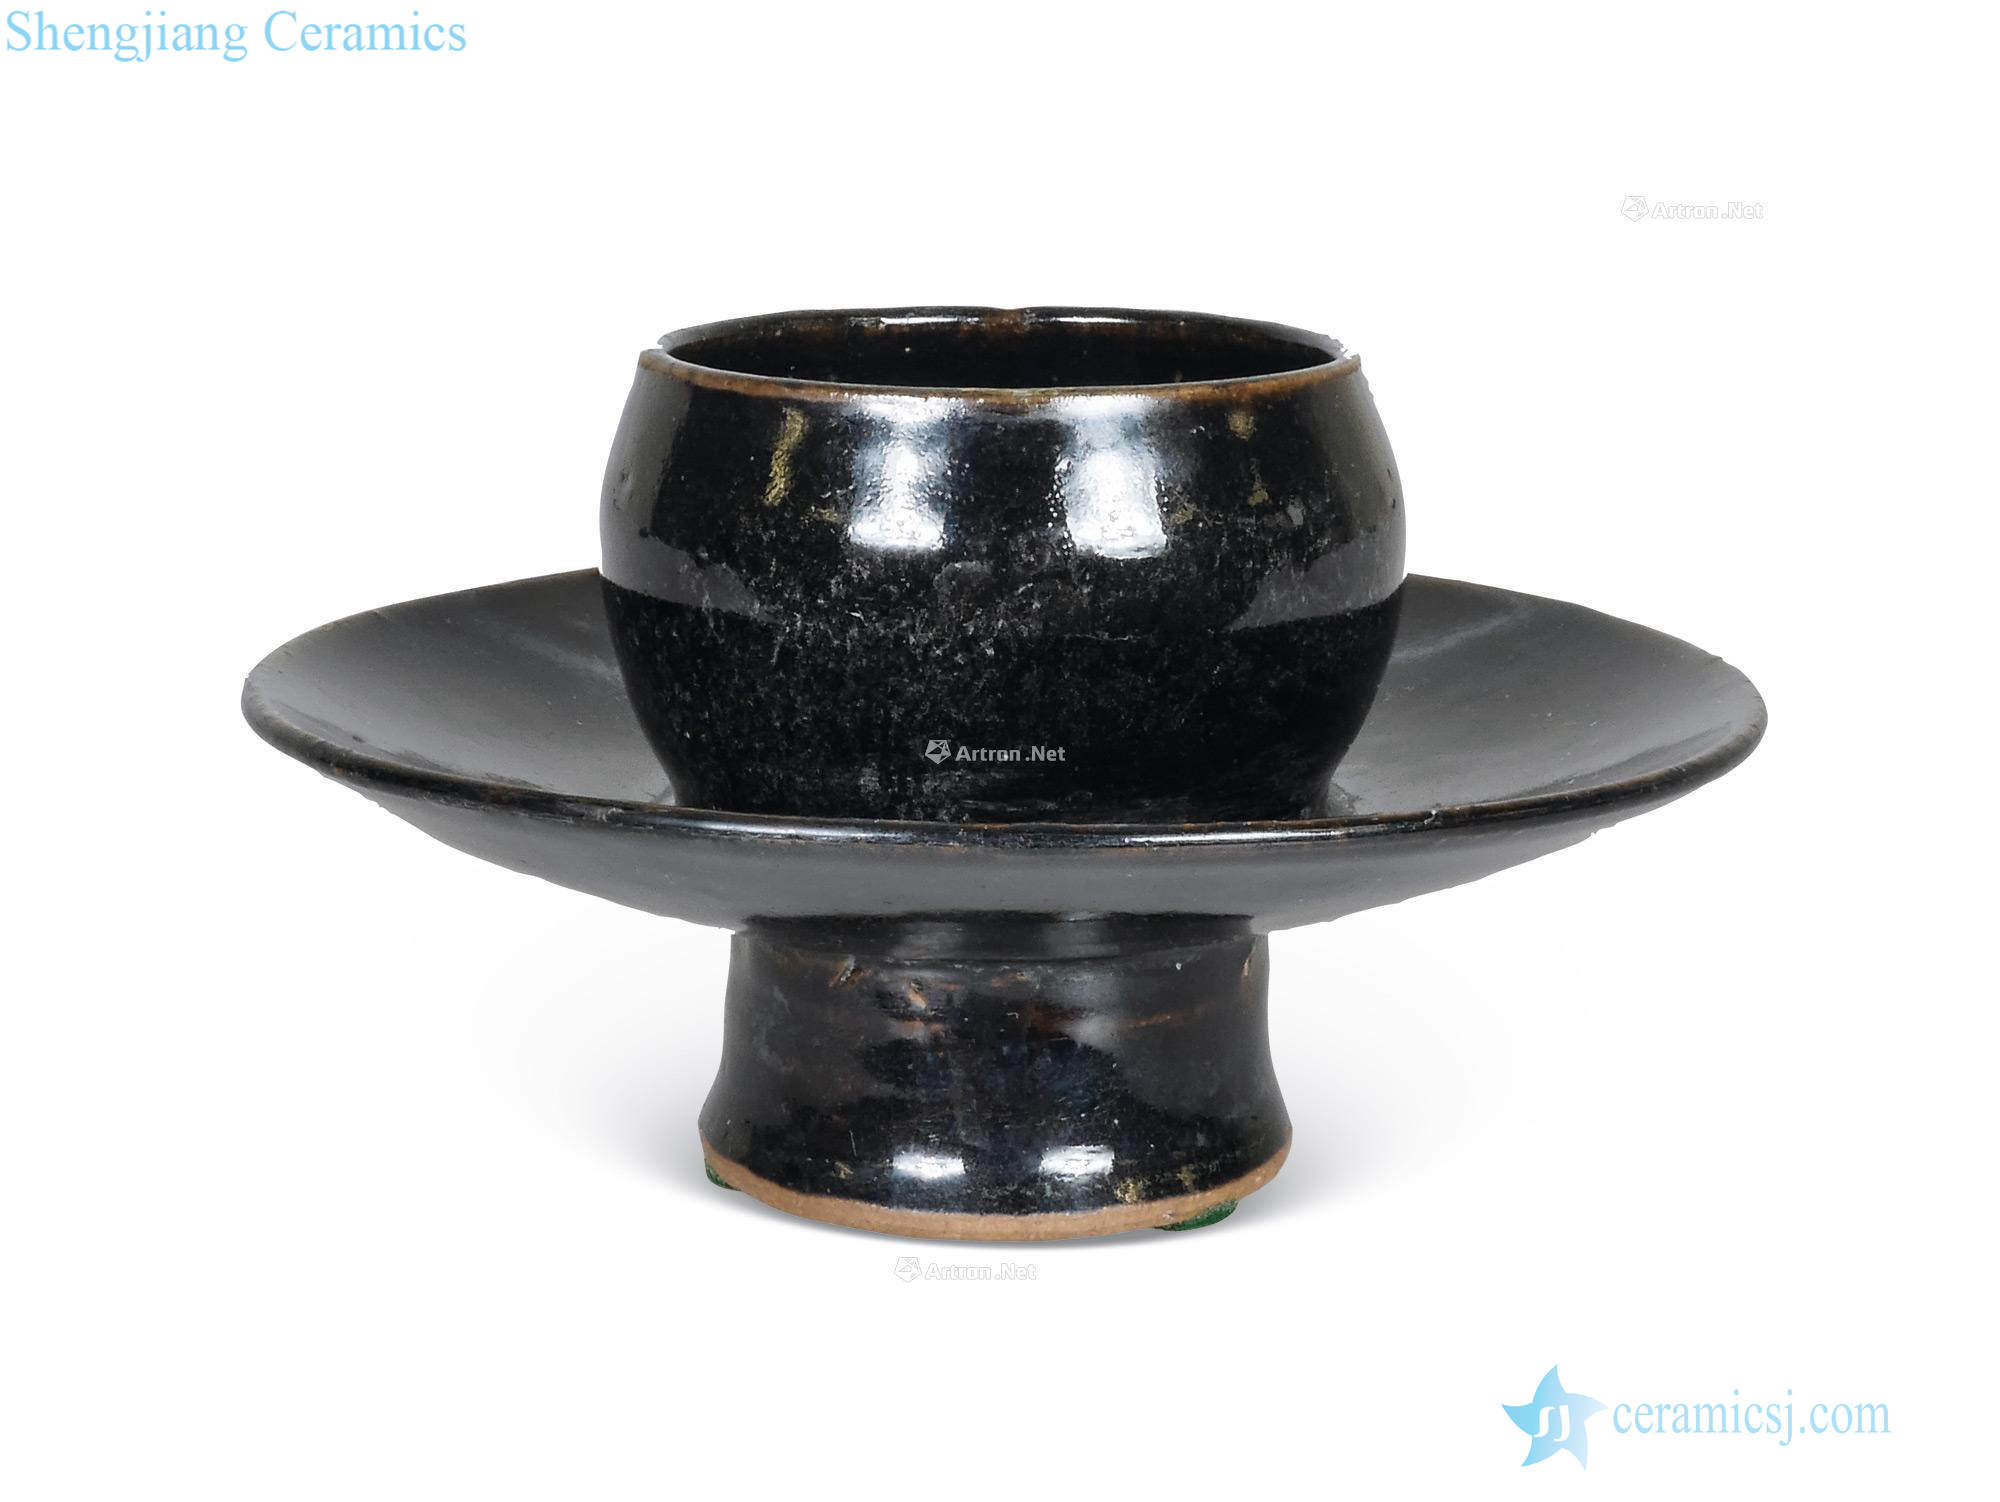 The song dynasty Yao state black glaze lamp